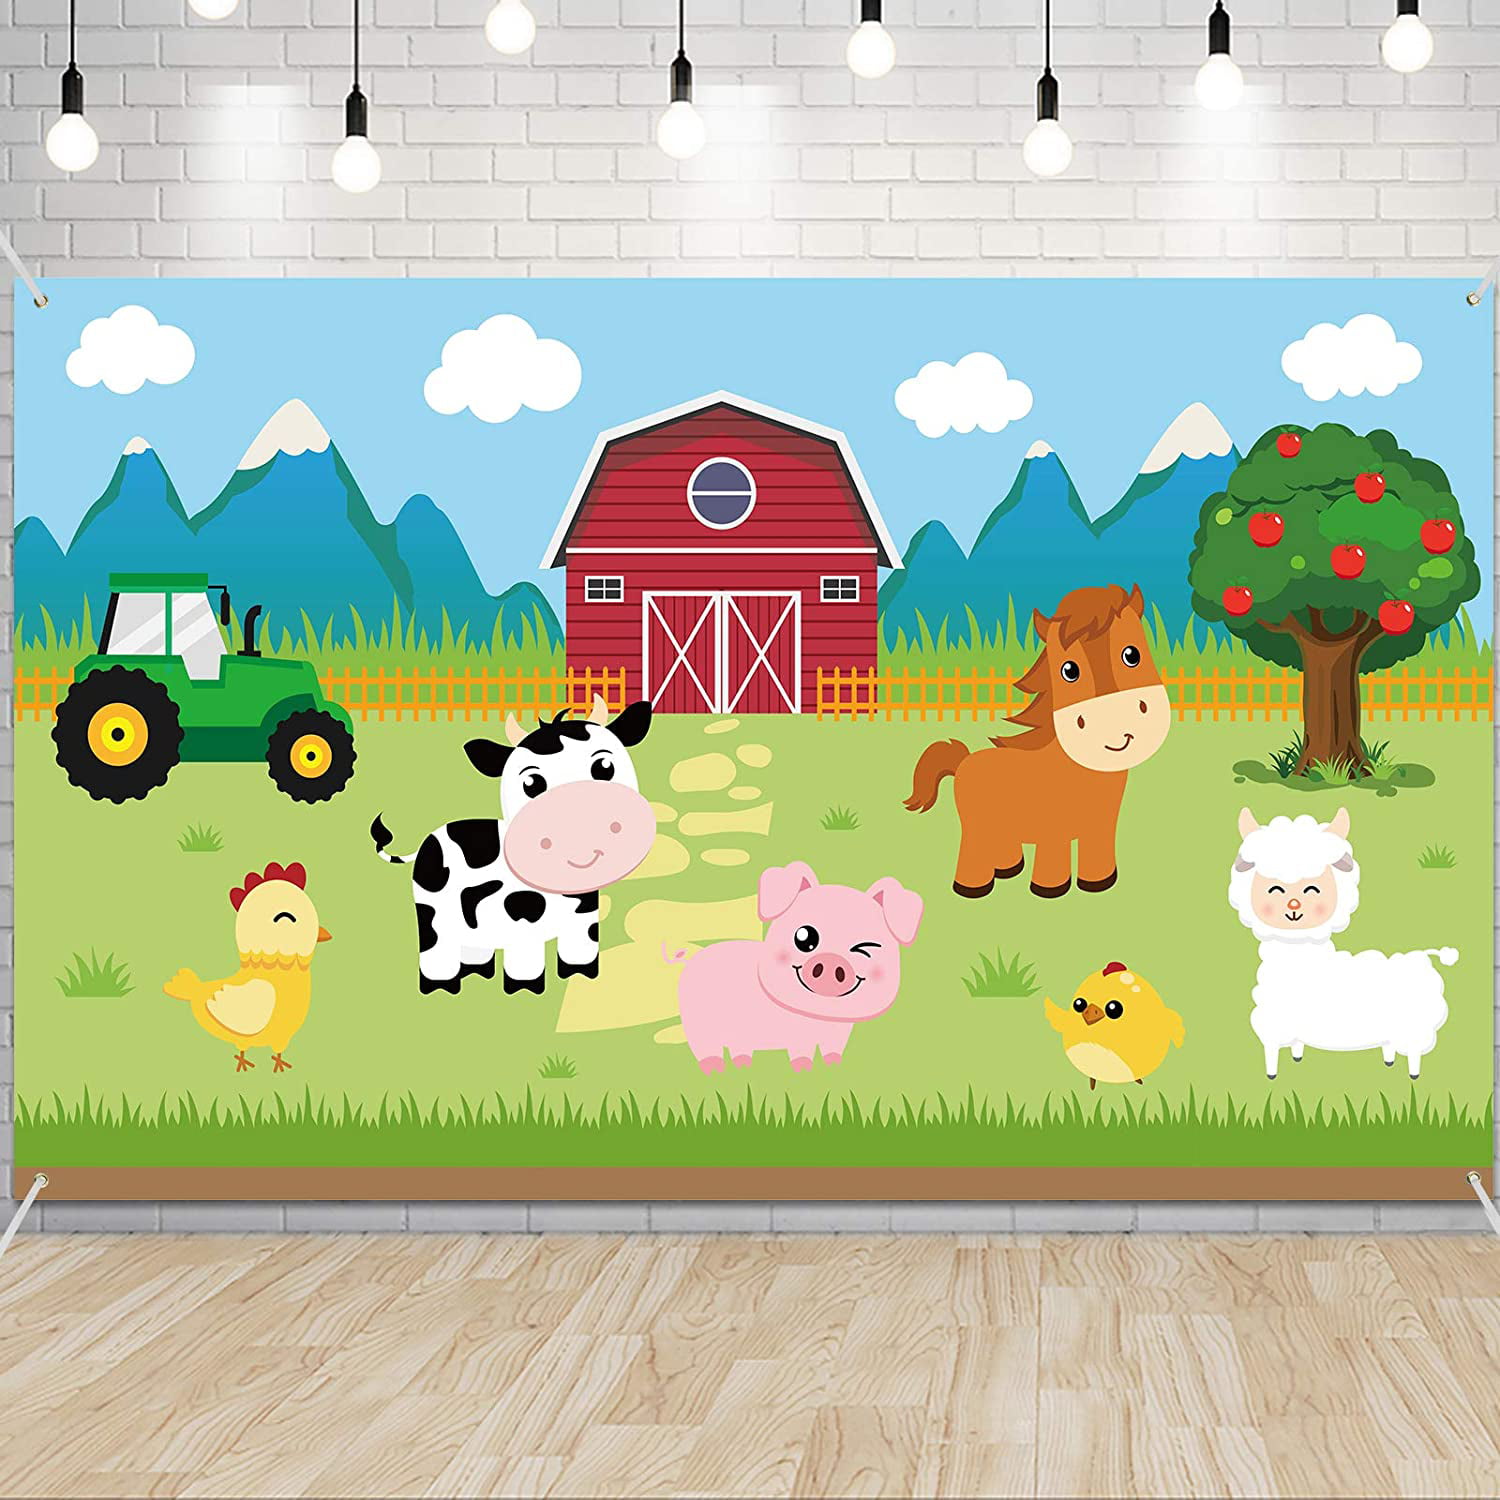 Farm Animals Birthday Door Banner Farm Animals Theme Birthday Party Banner Hanging Yard Signs for Indoor Outdoor Decorations Supplies 2 Pieces Welcome to The Farm Sign Birthday Party Cartoon Farm Birthday Party Porch Sign Red 